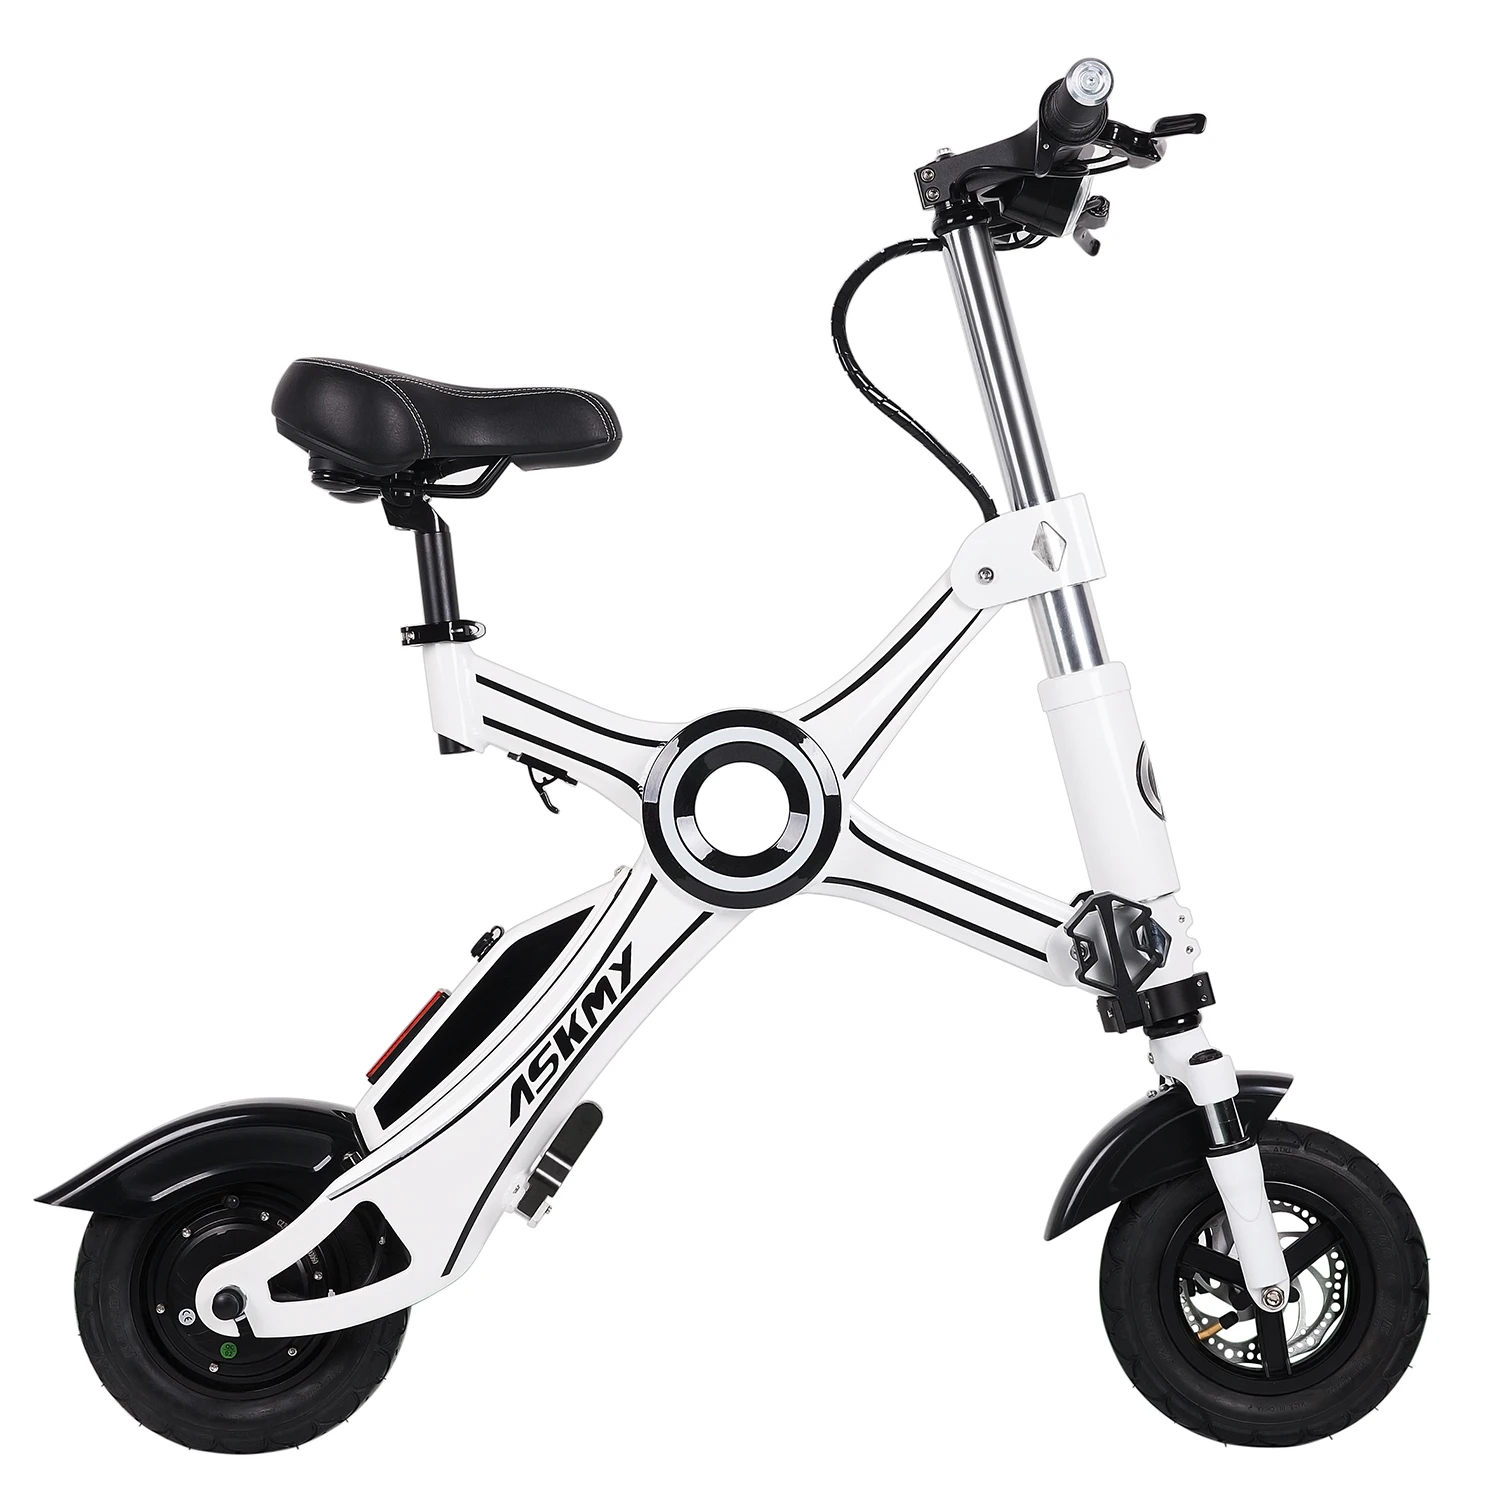 

ASKMY 10 inch Electric Bike 2 Wheel Bicycle Electric Folding E Bike 36V 7.5 AH 250W Adult City Cycle Factory Wholesale